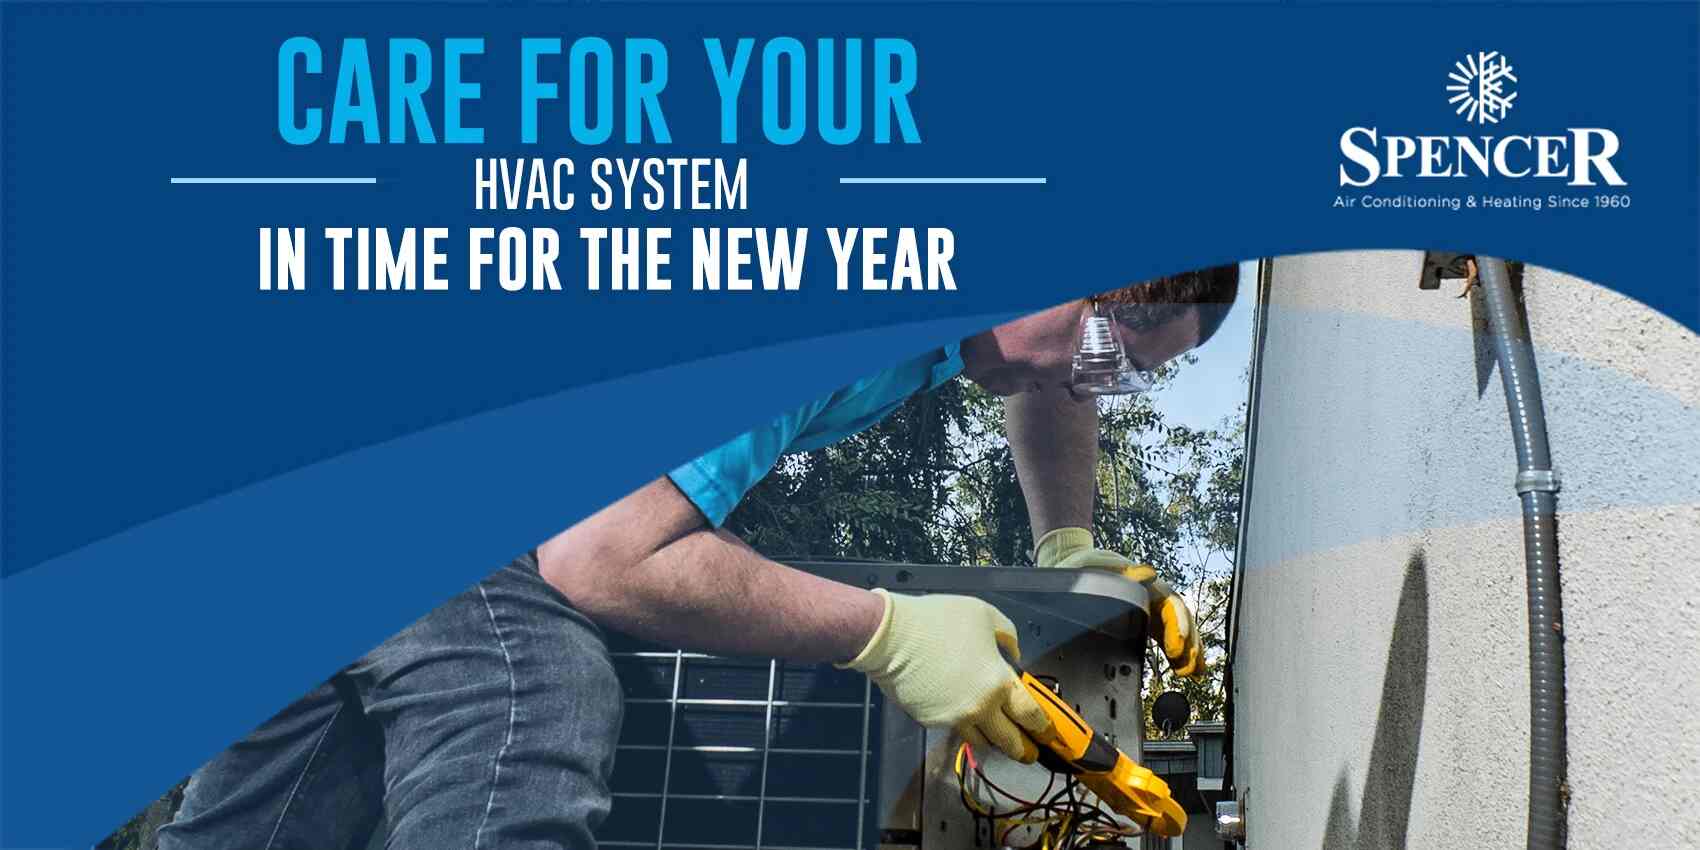 Care for Your HVAC System in Time for the New Year